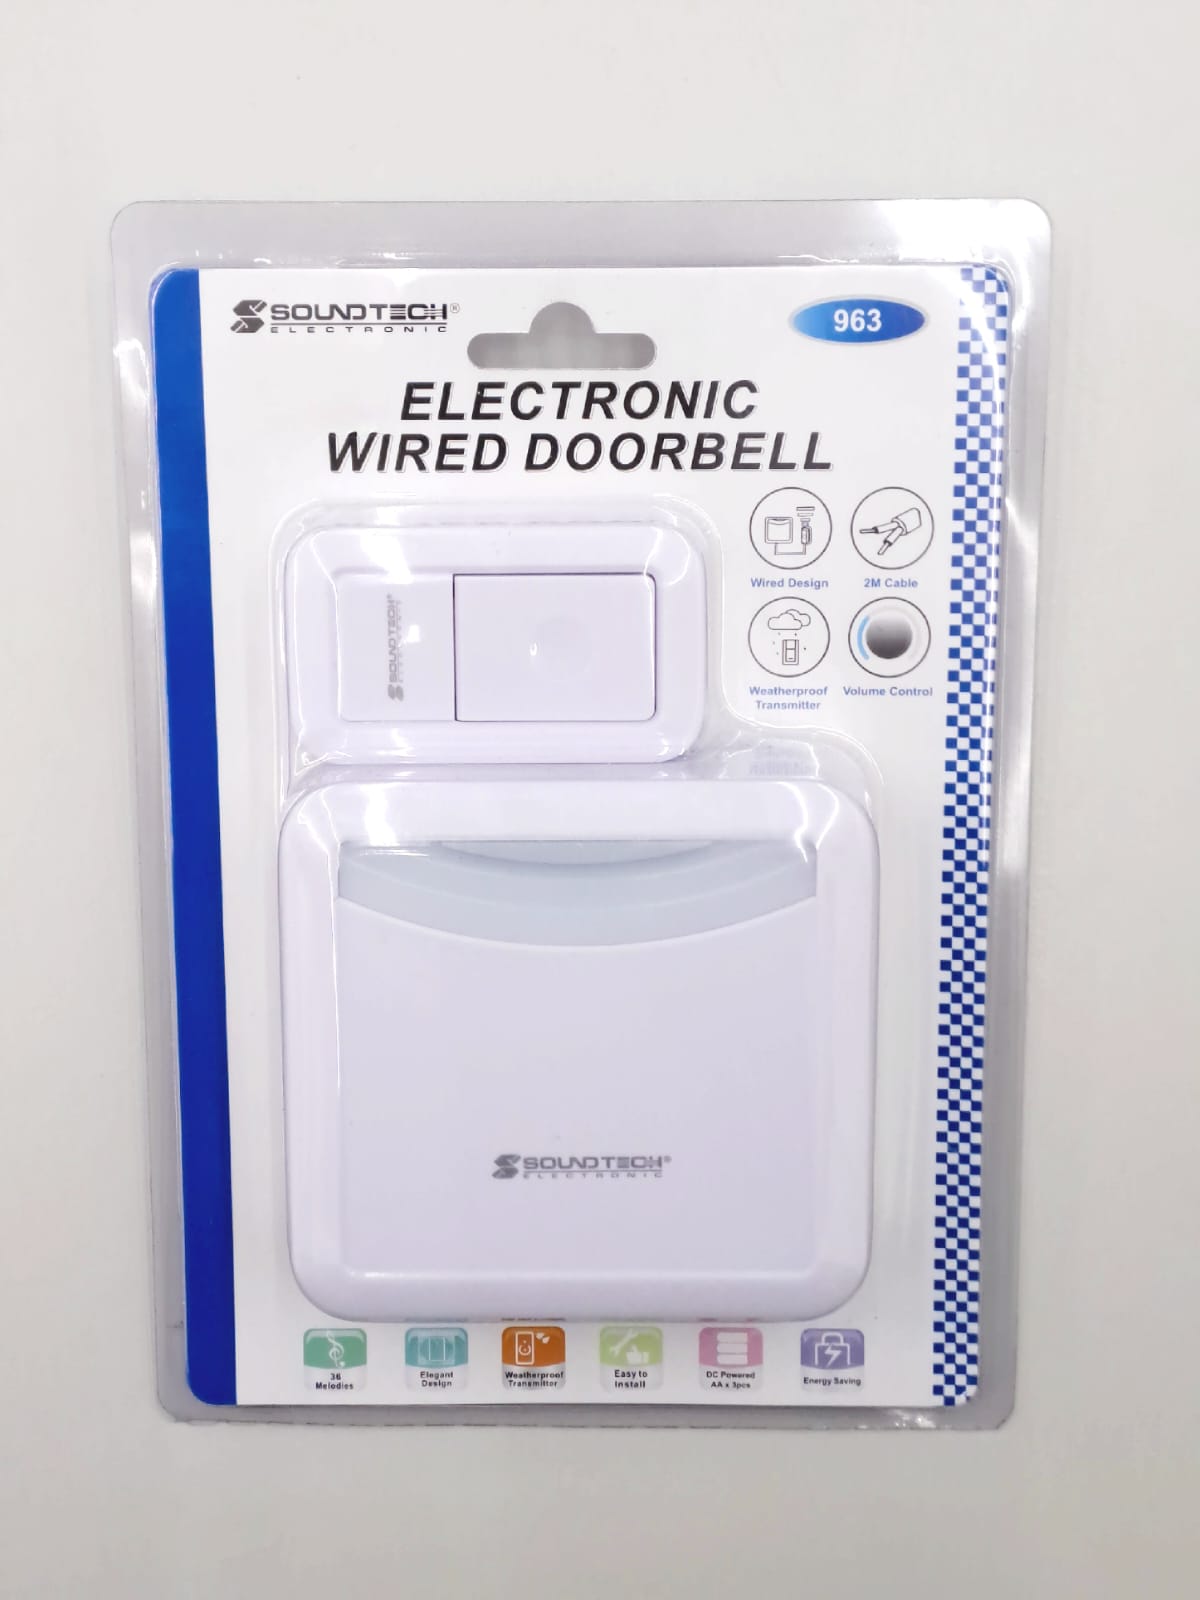 Soundtech Electronic Wired Doorbell